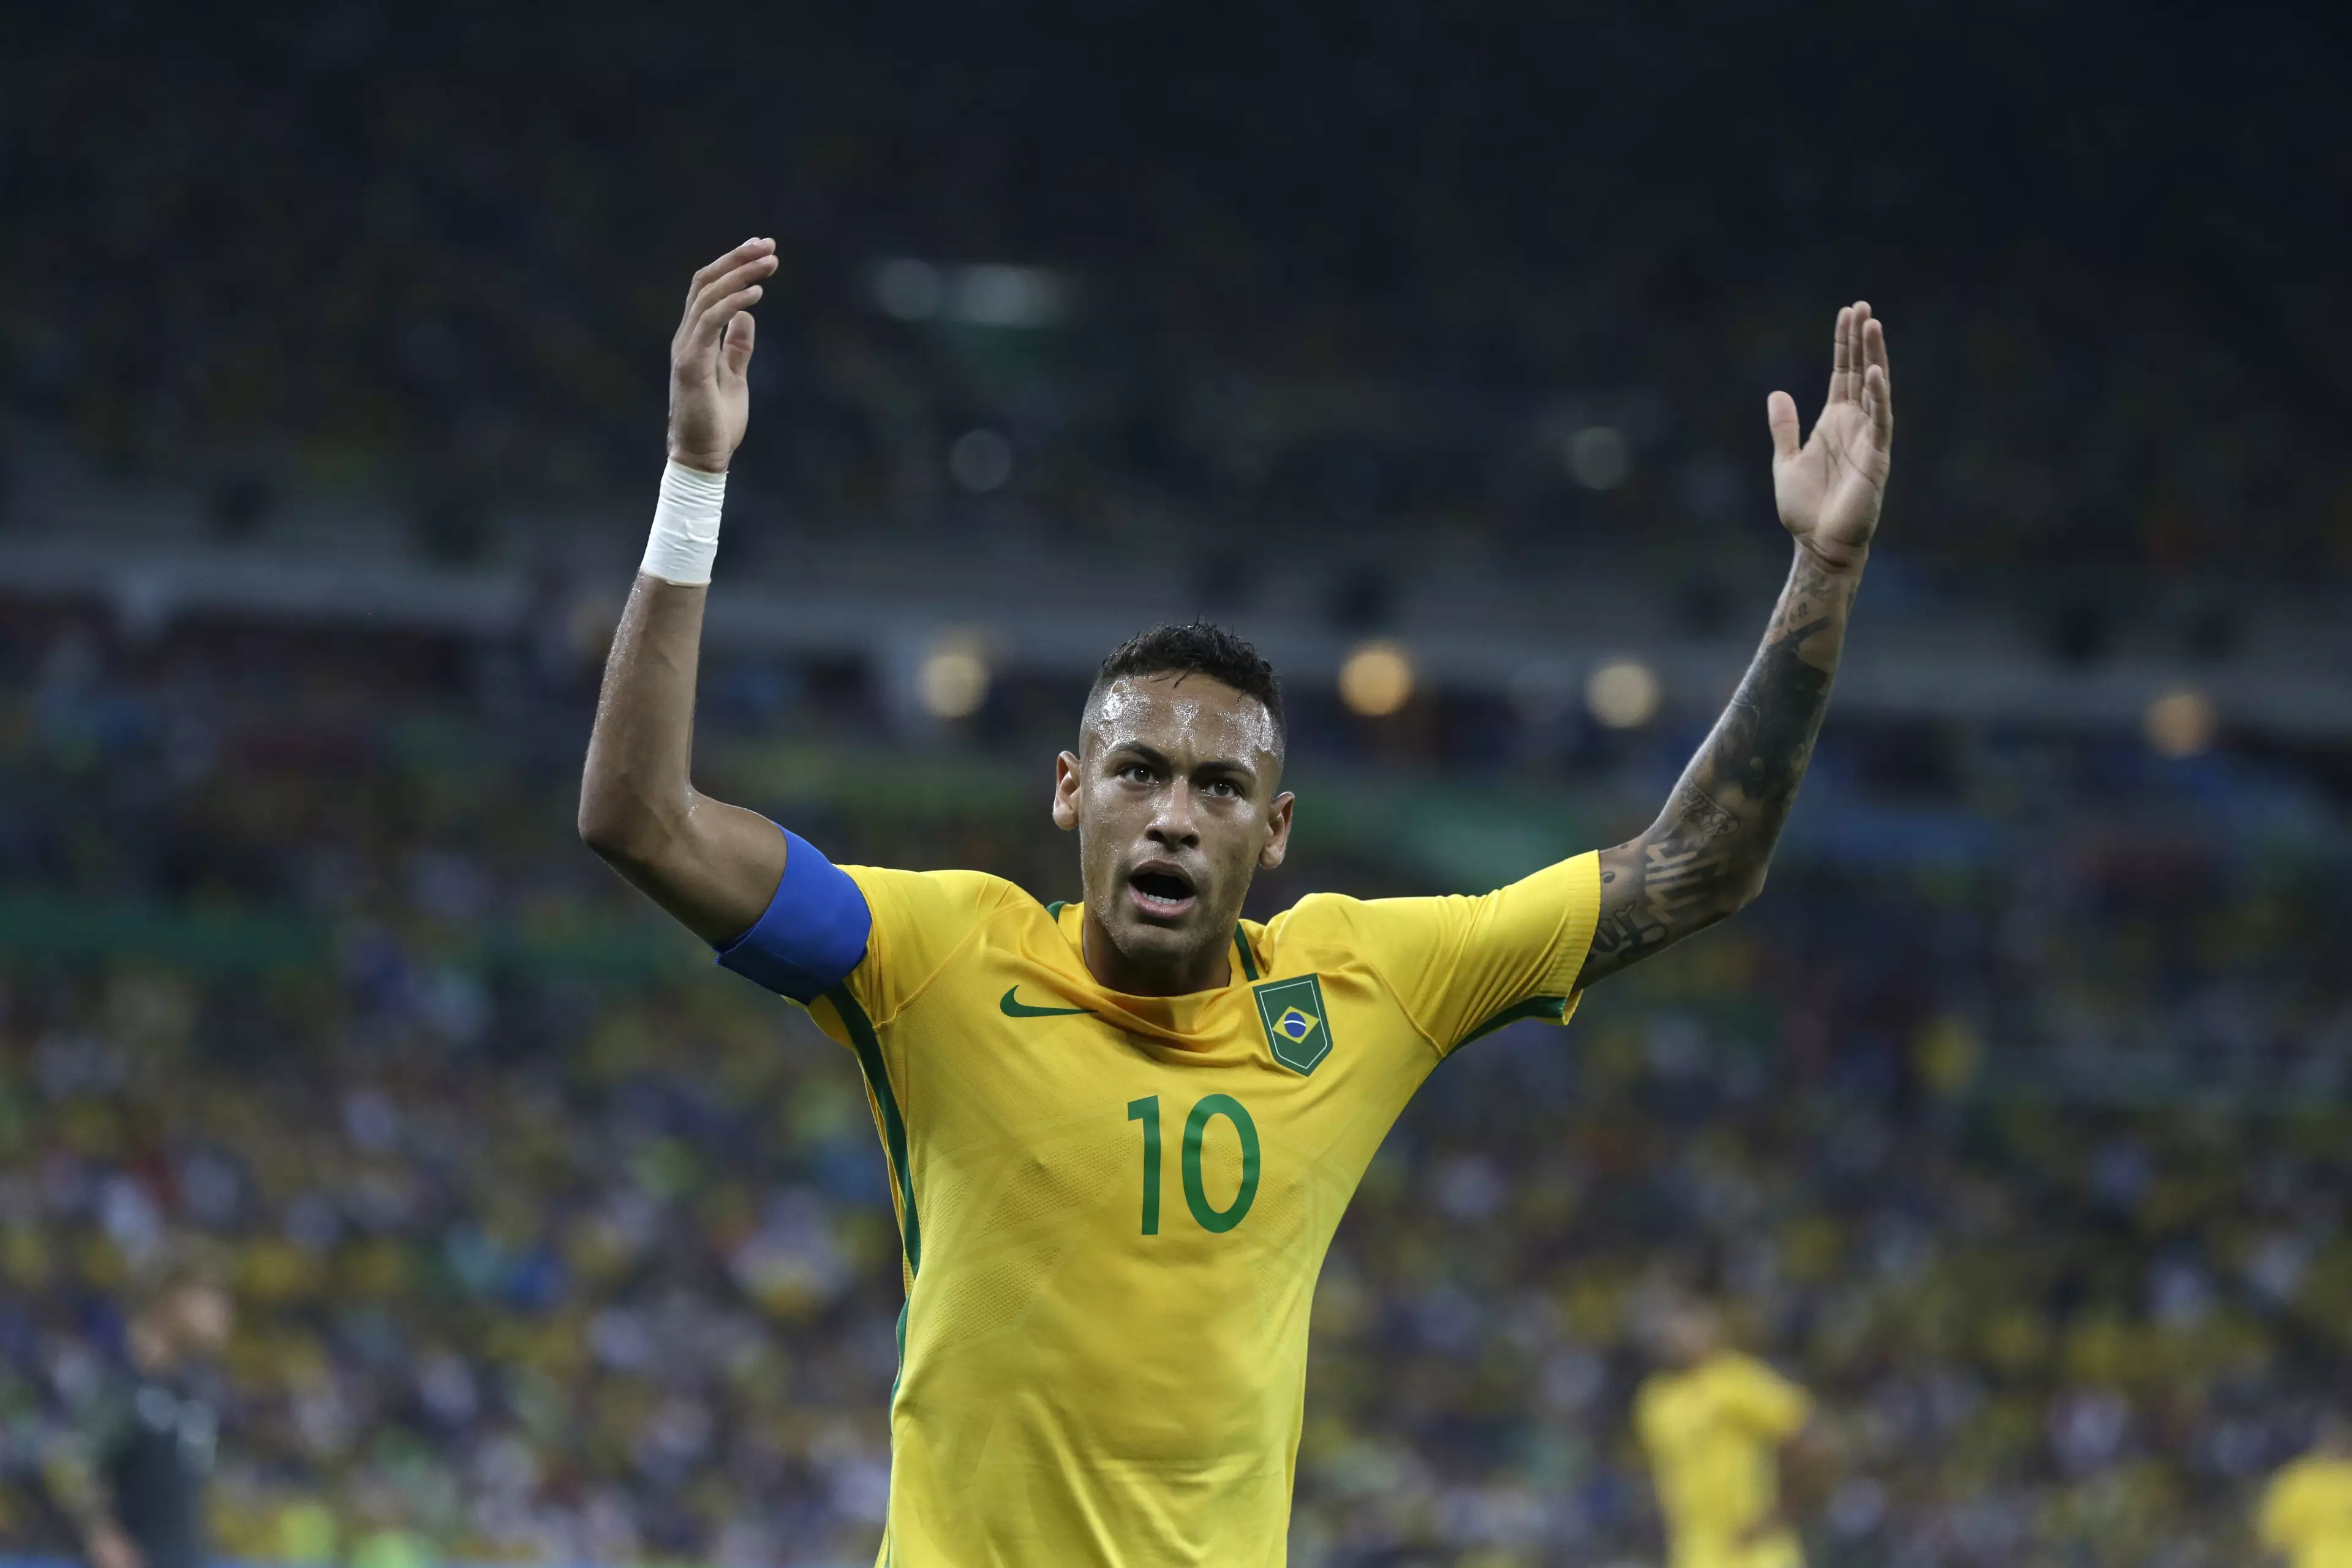 Neymar is the joint most valuable player at the World Cup. Image: PA Images